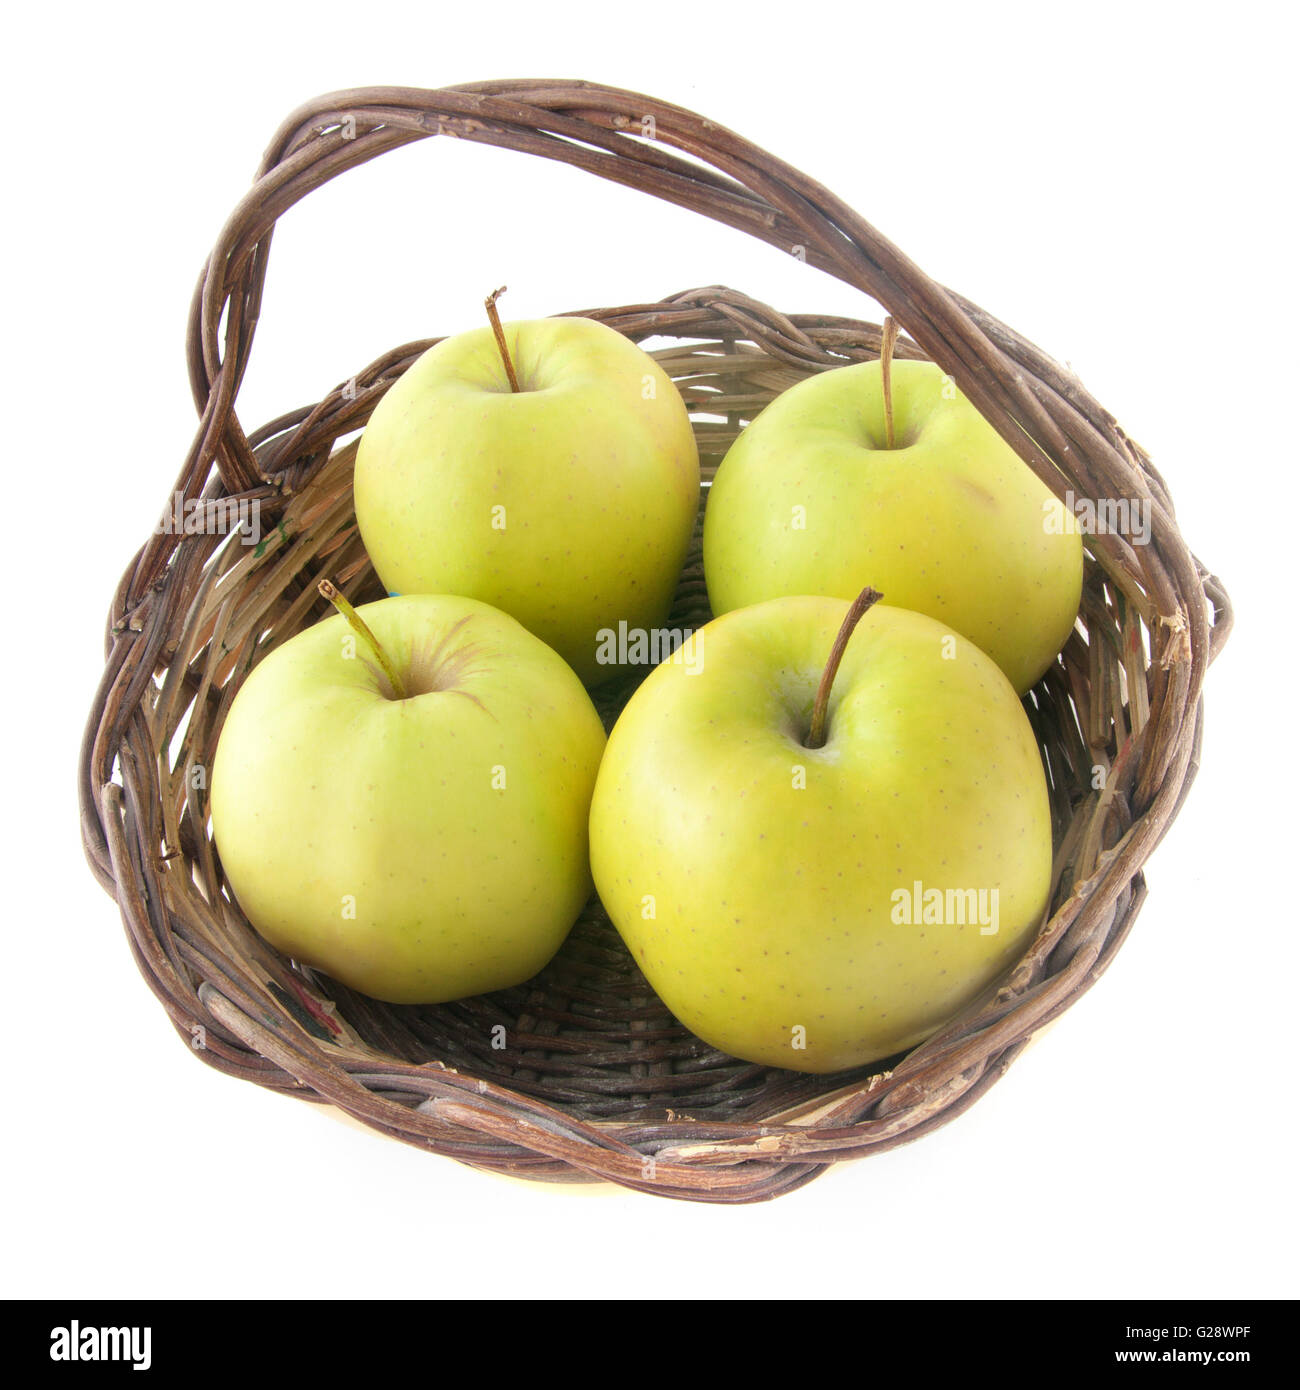 Four green apples in a wicker basket - isolated on white Stock Photo